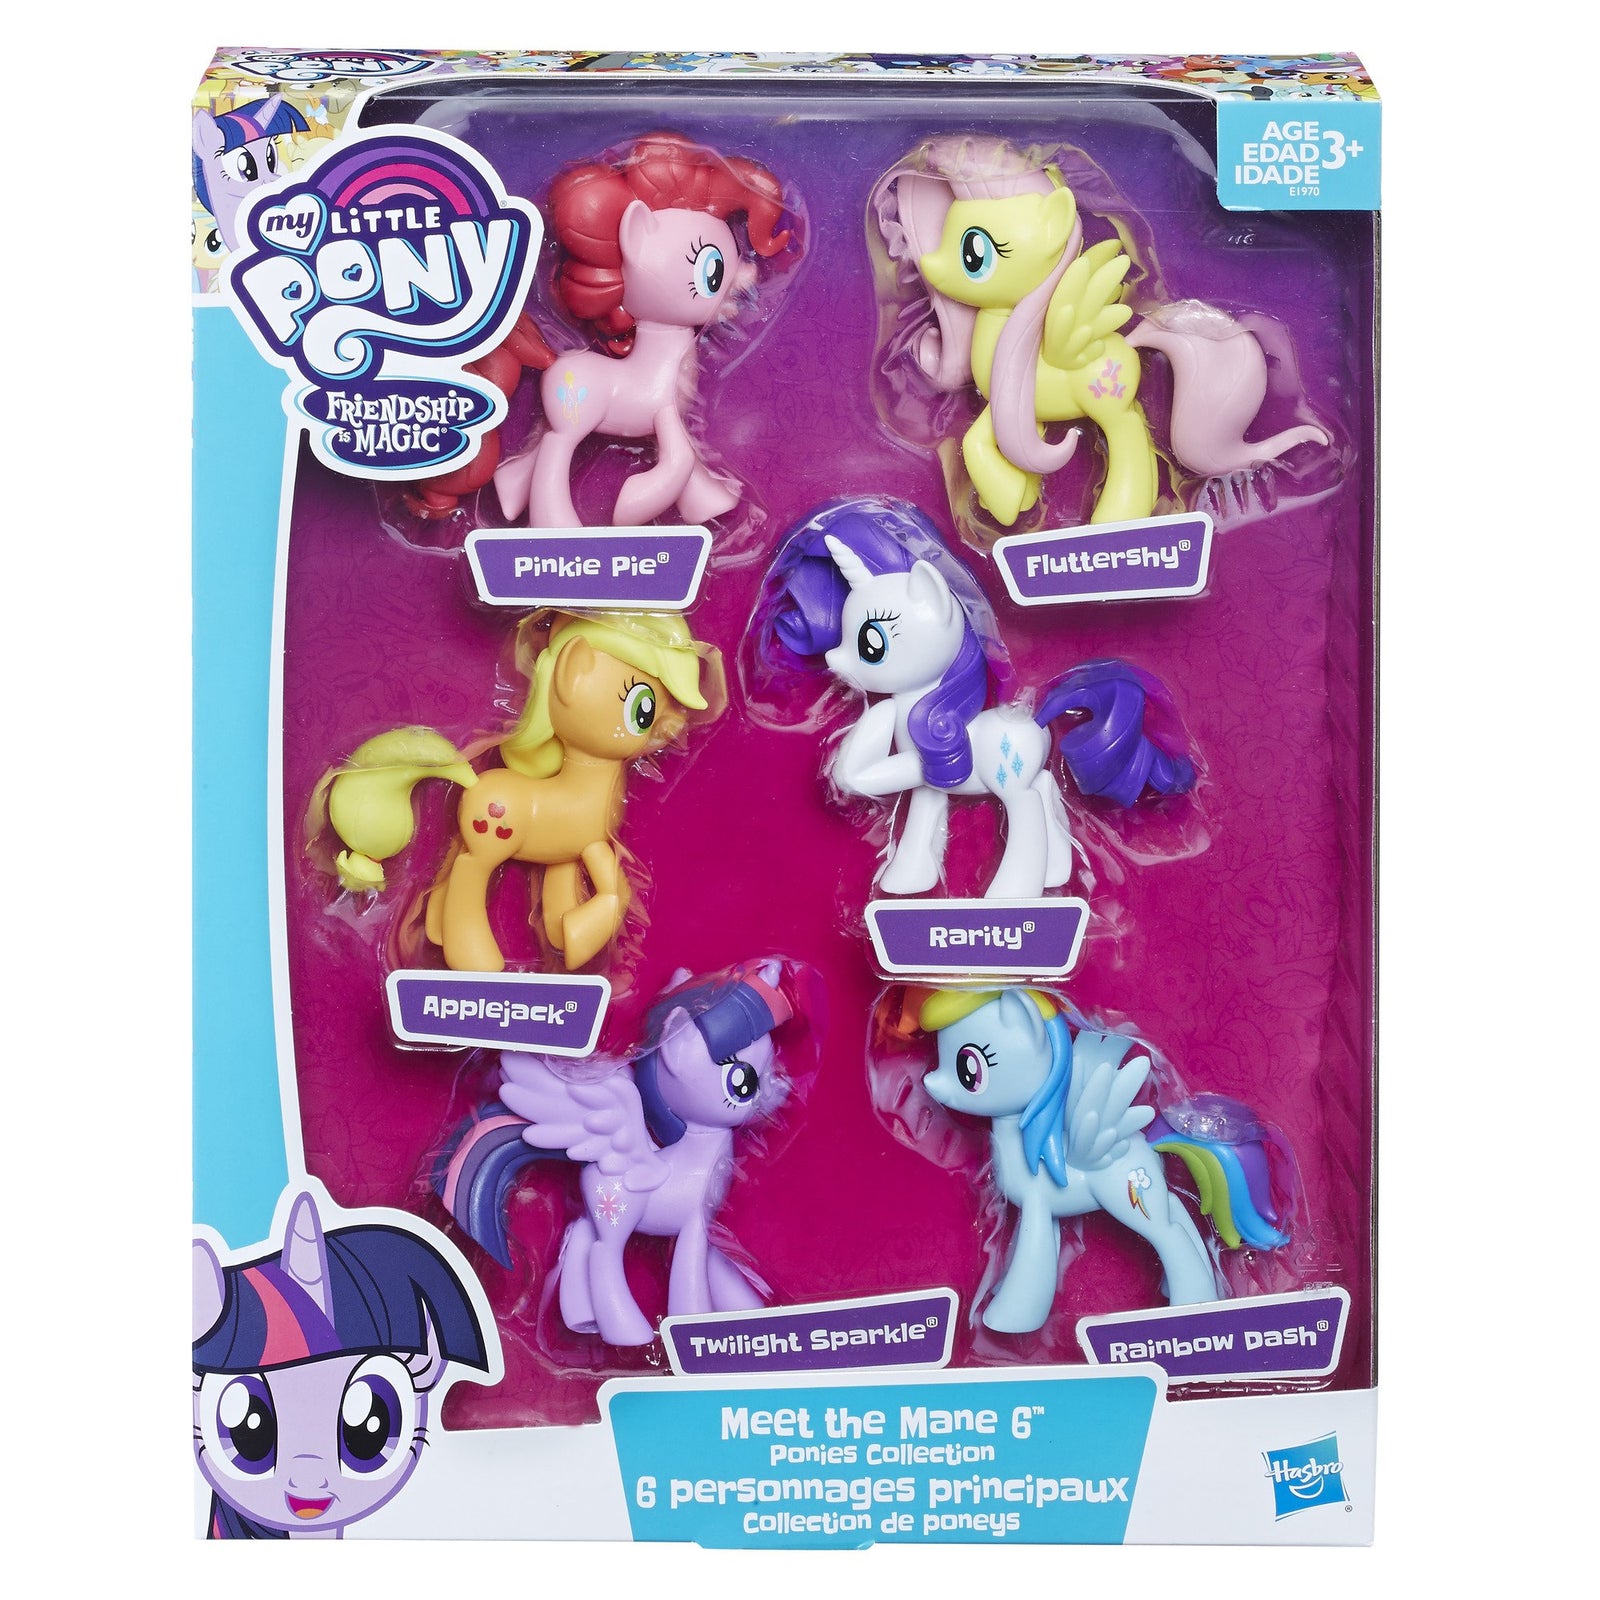 My Little Pony Toys Meet The Mane 6 Ponies Collection (Amazon Exclusive)